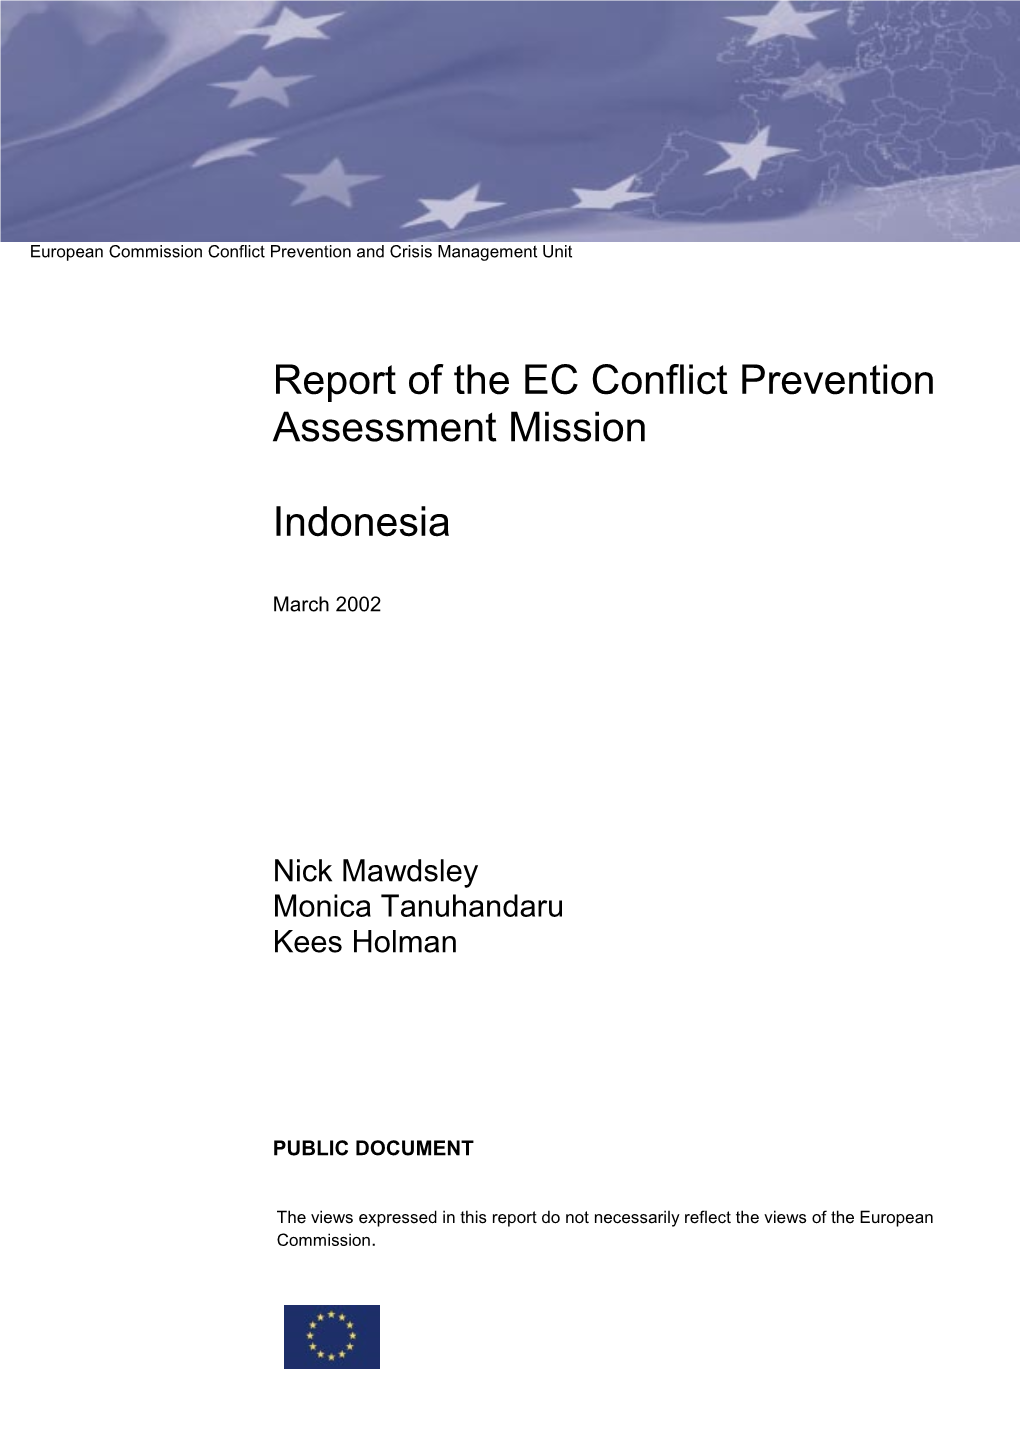 Report of the EC Conflict Prevention Assessment Mission